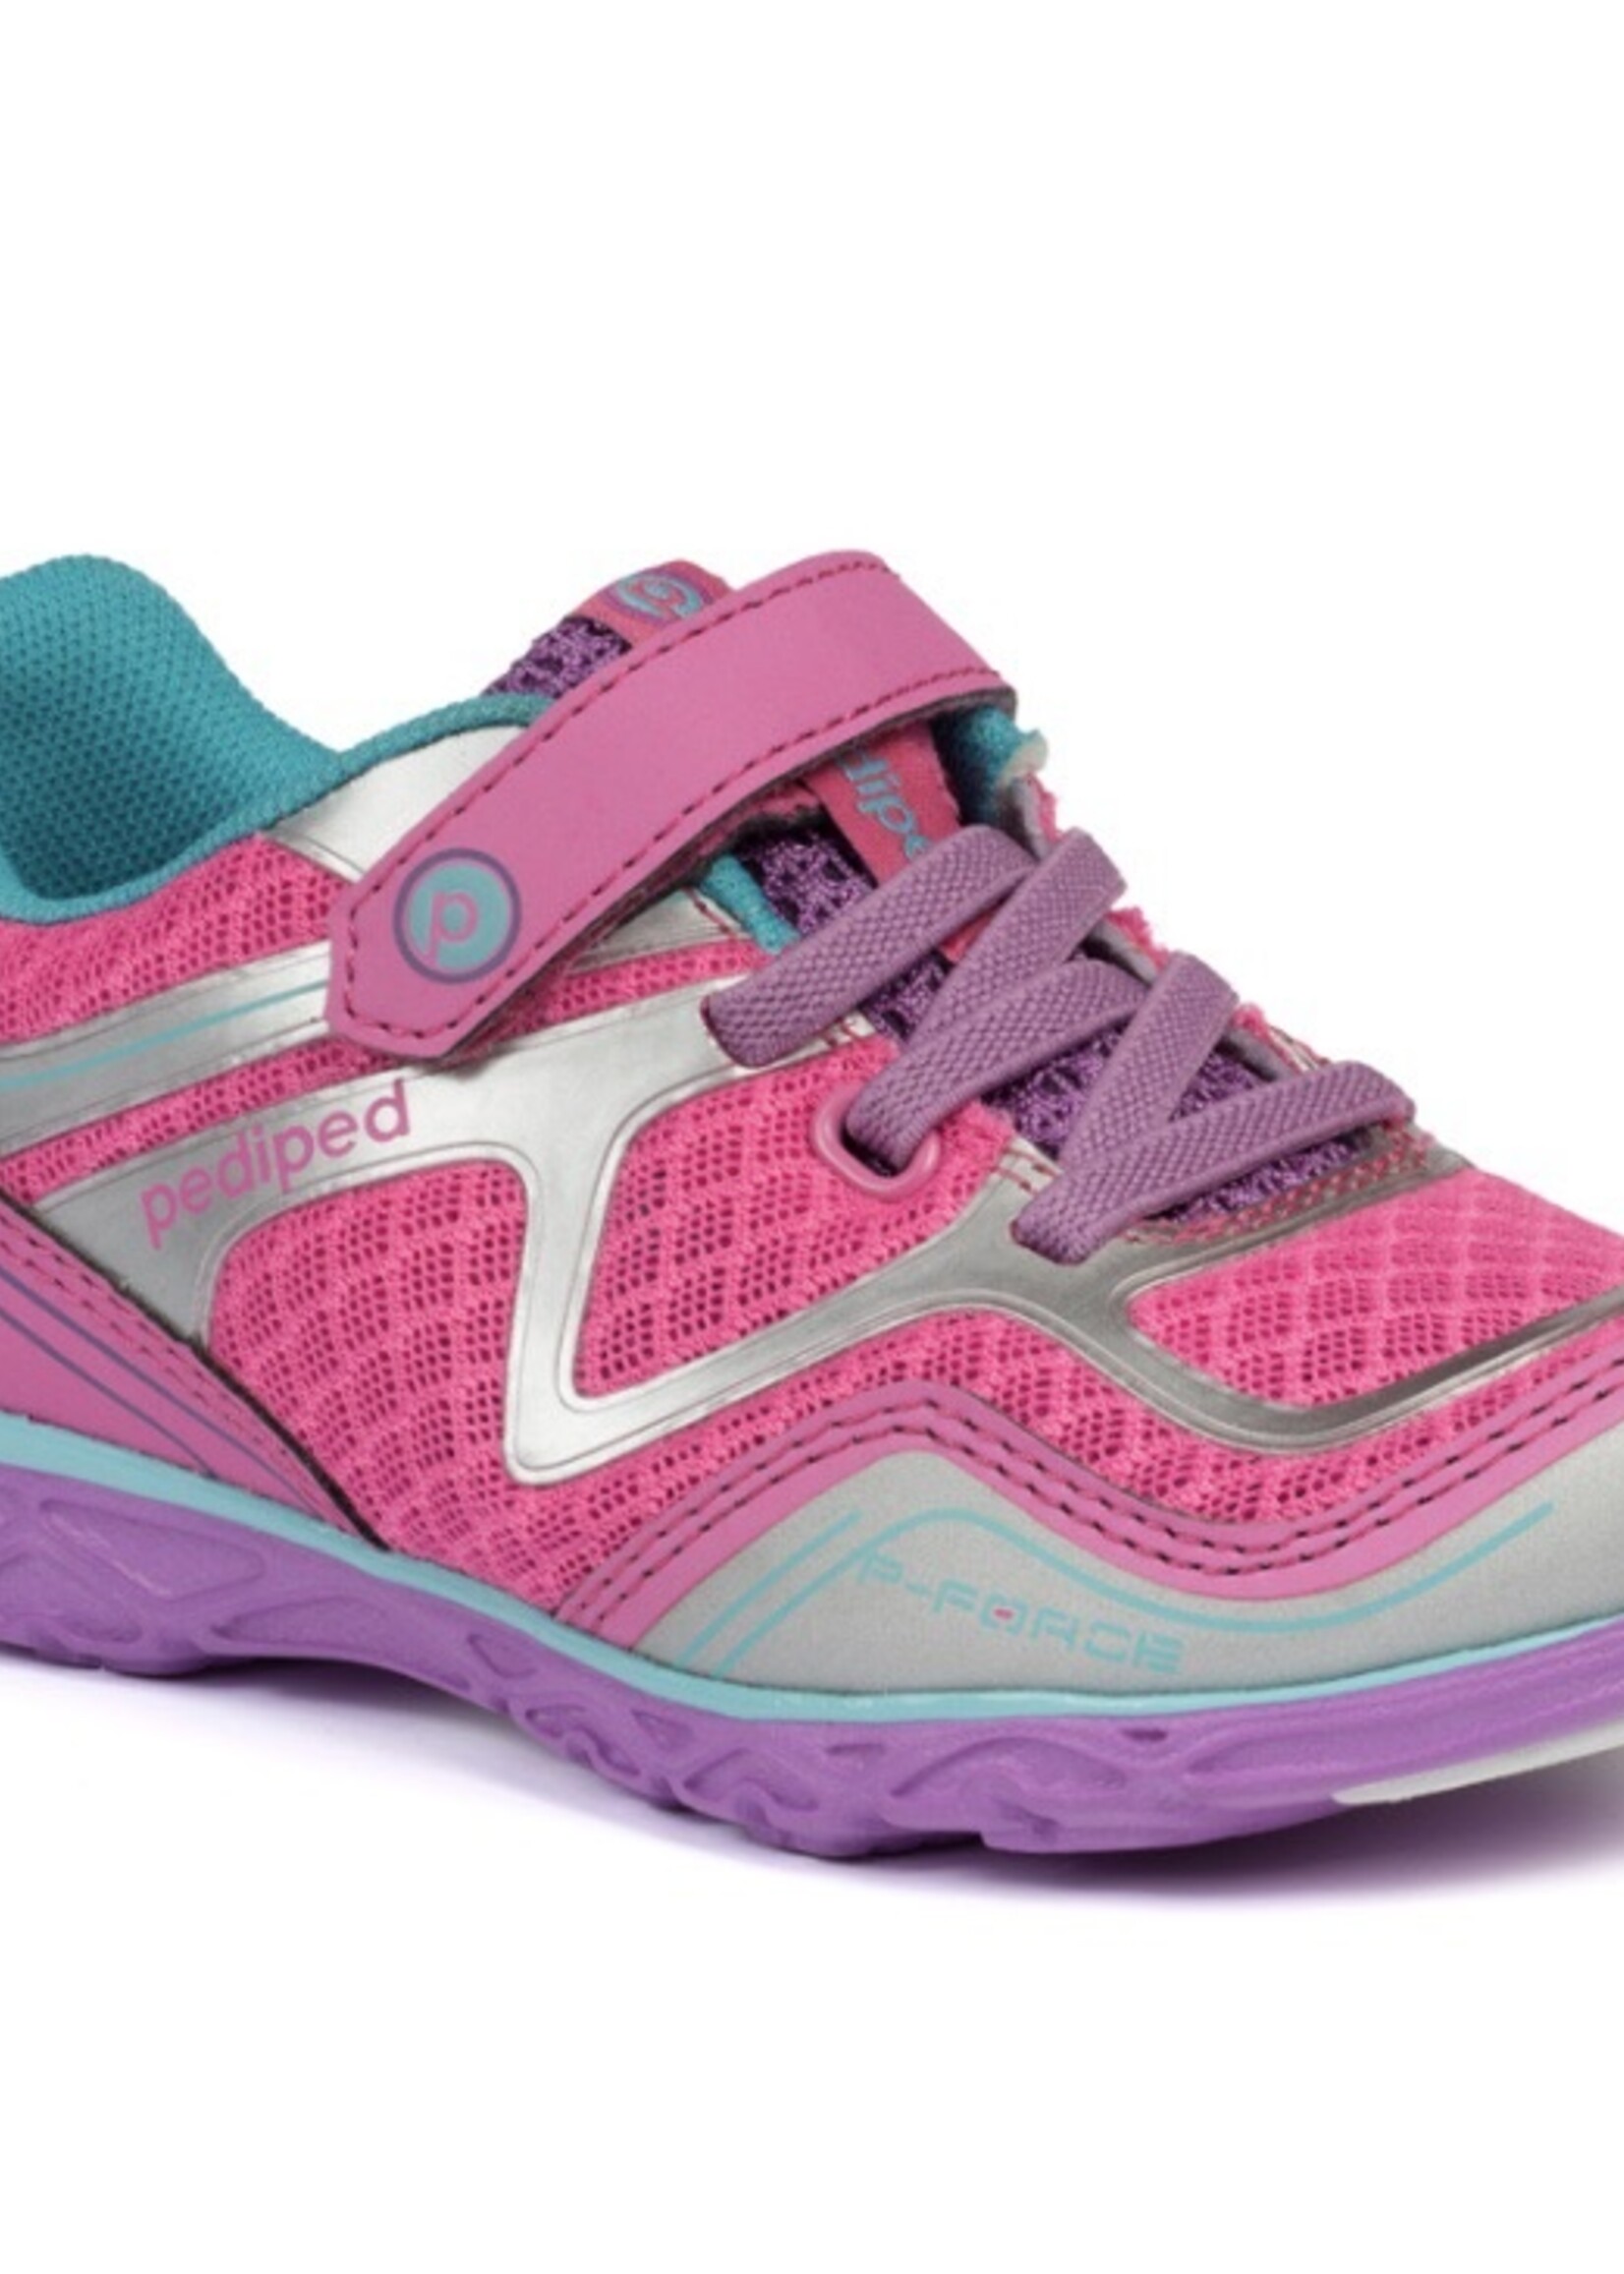 Pediped Pediped Force Pink/Silver